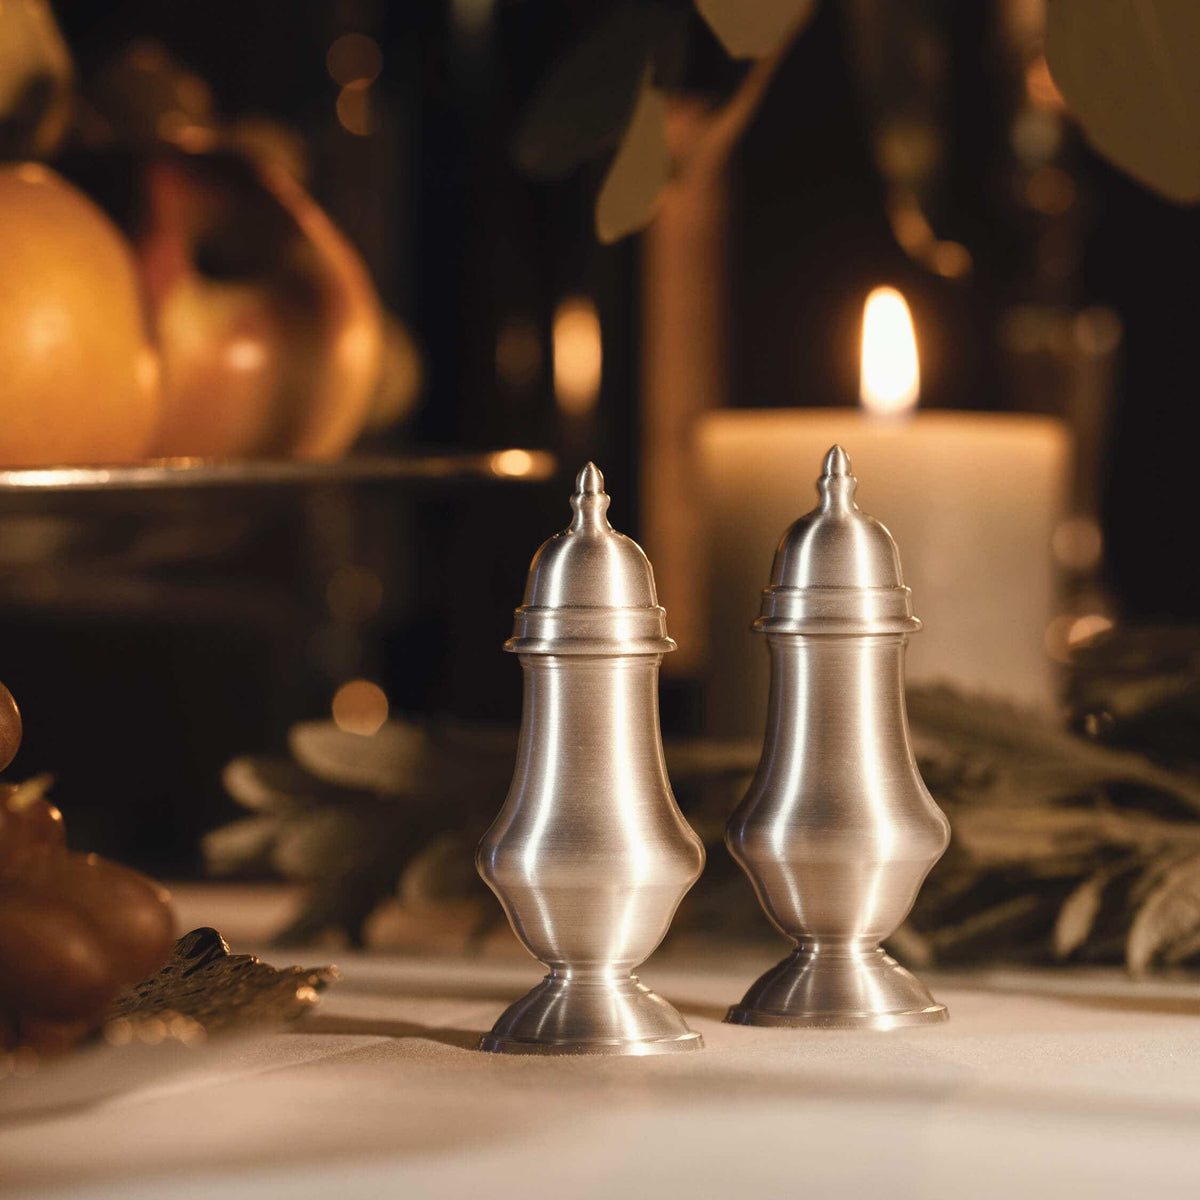 Royal Selangor Salt and Pepper Shakers with Gift Box - Pewter - Notbrand